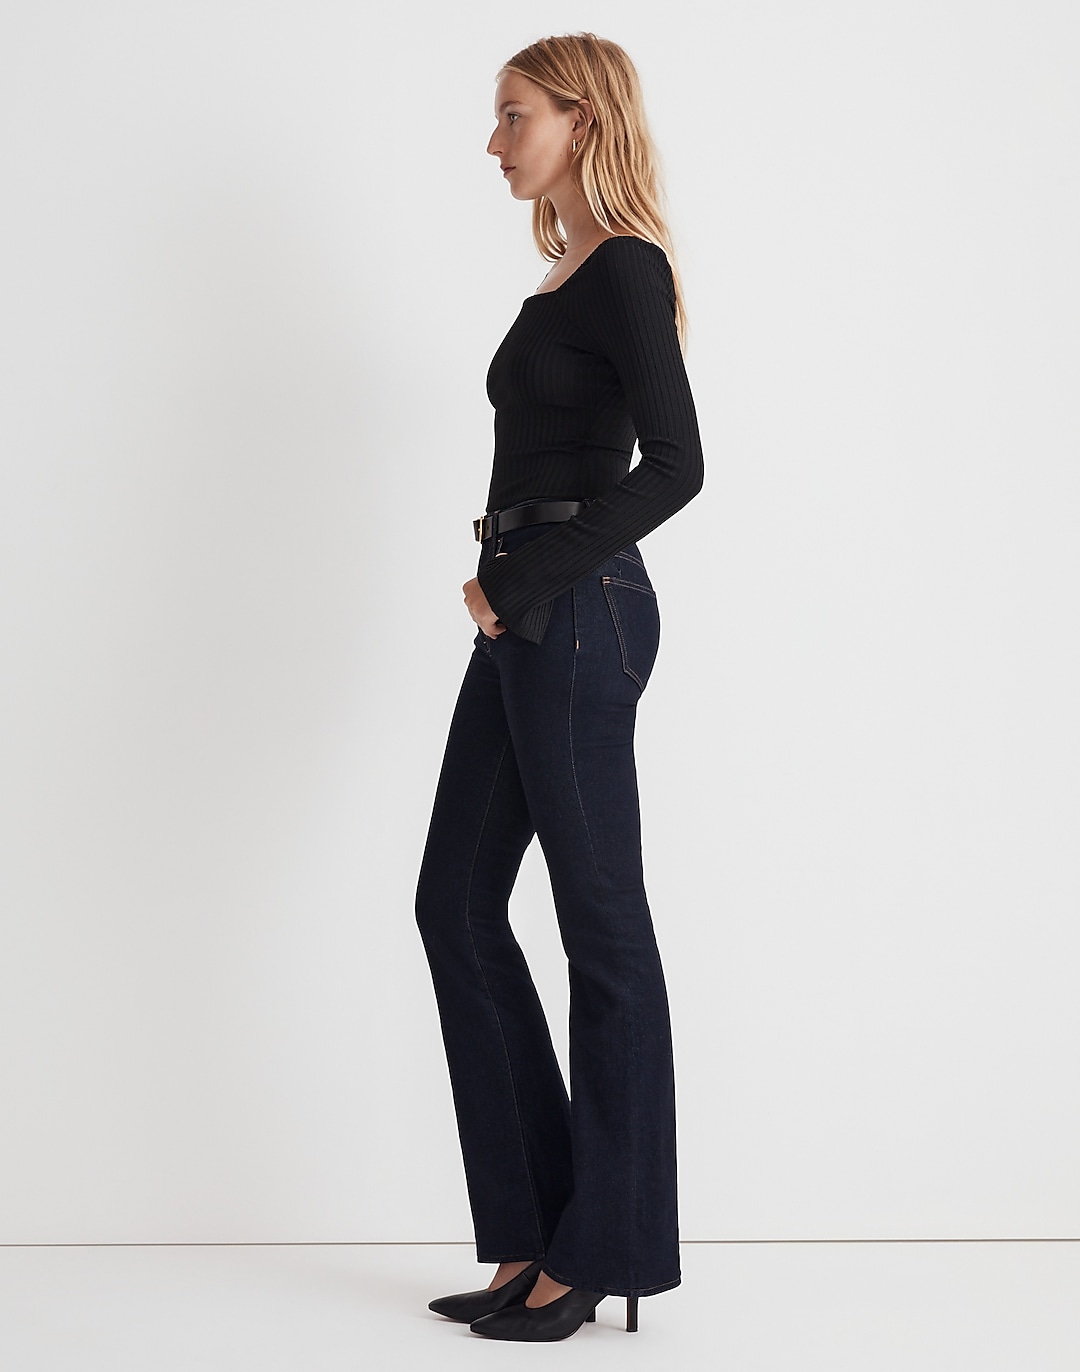 Skinny Flare Jeans in Rinse Wash | Madewell